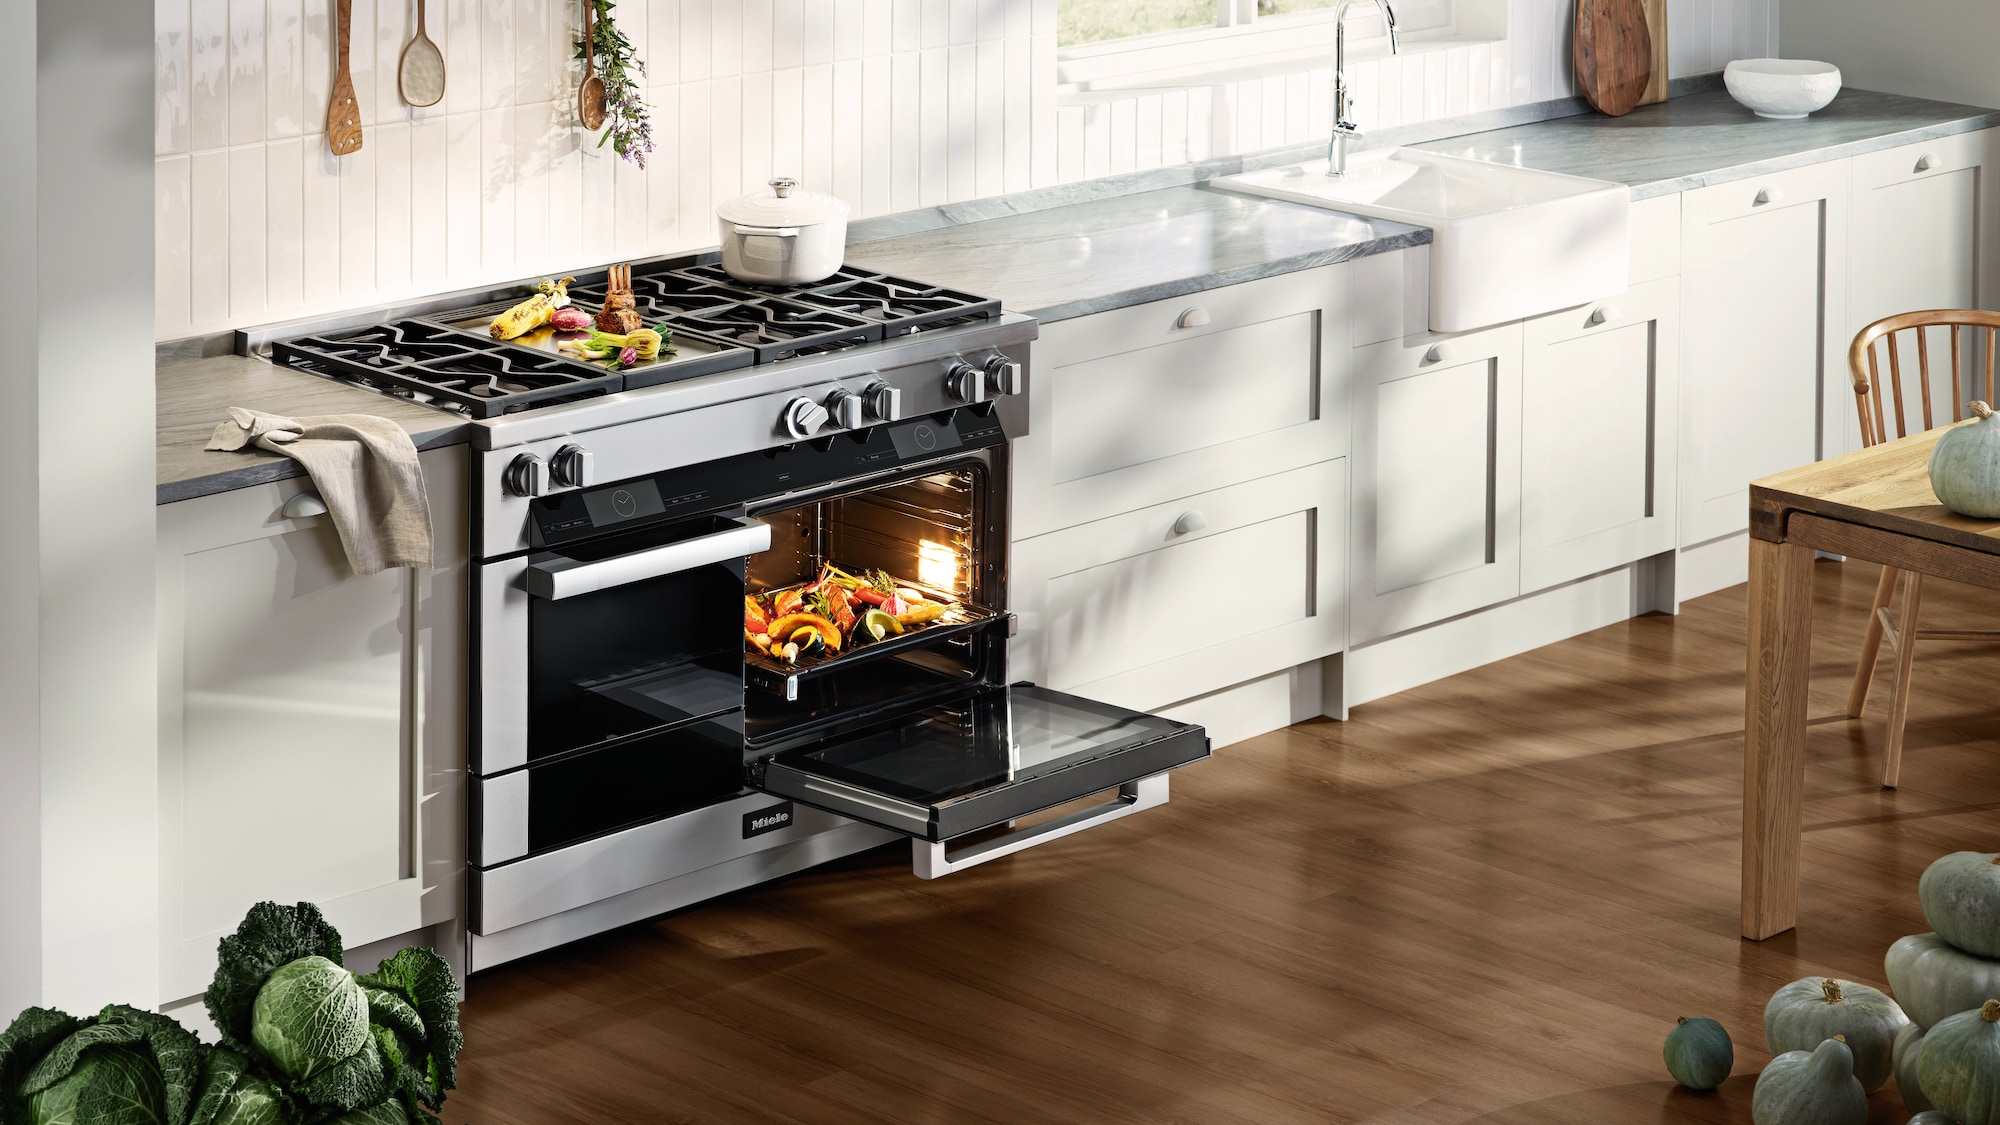 Miele-Range-with-roasted-vegetables-inside-oven-and-ontop-of-cooktop